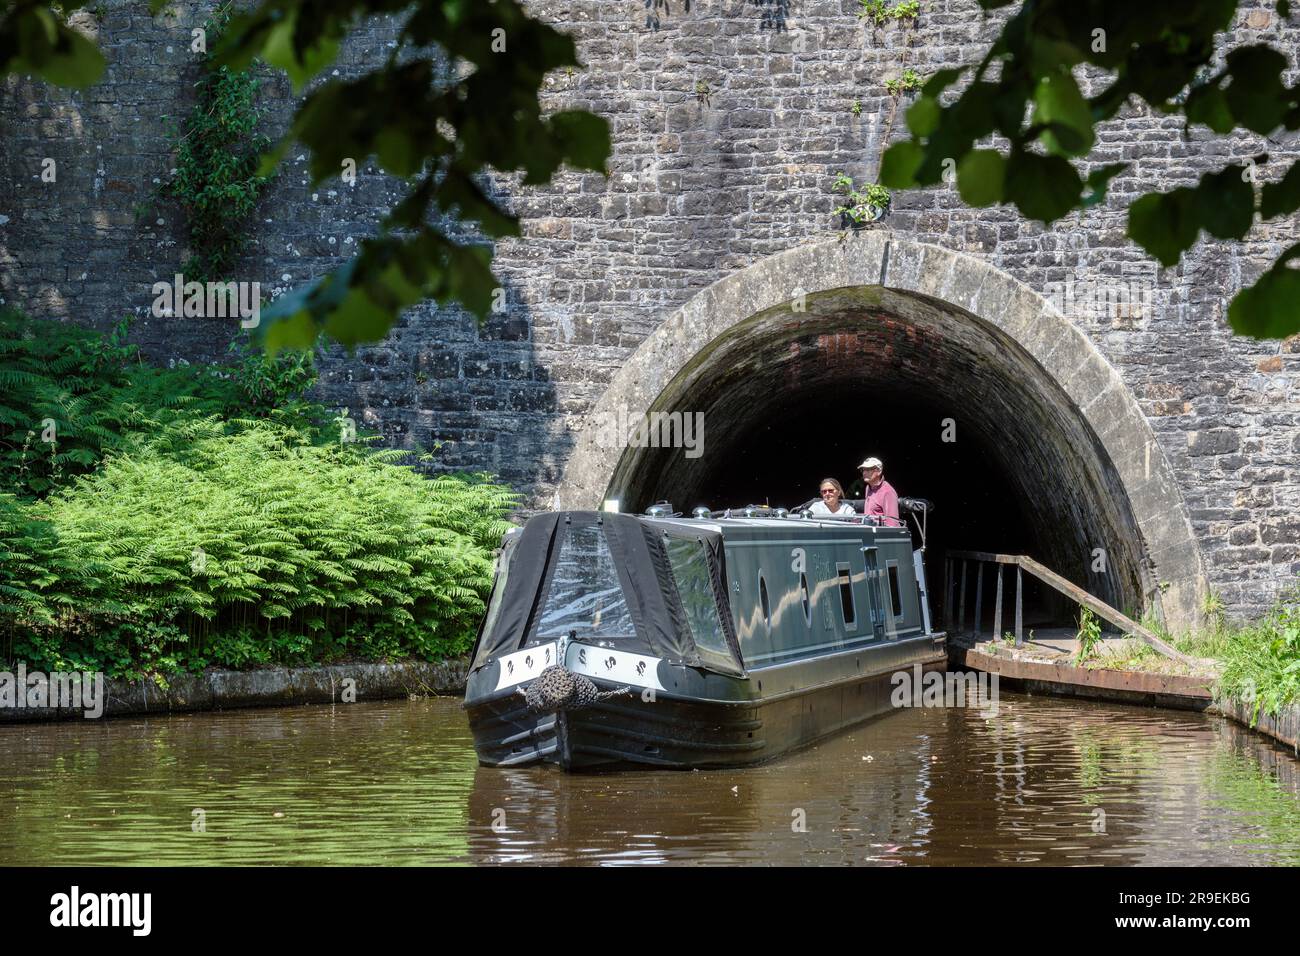 A narrowboat coming out of the Chirk Tunnel, Shropshire Union Canal Llangollen Branch, Wales Stock Photo